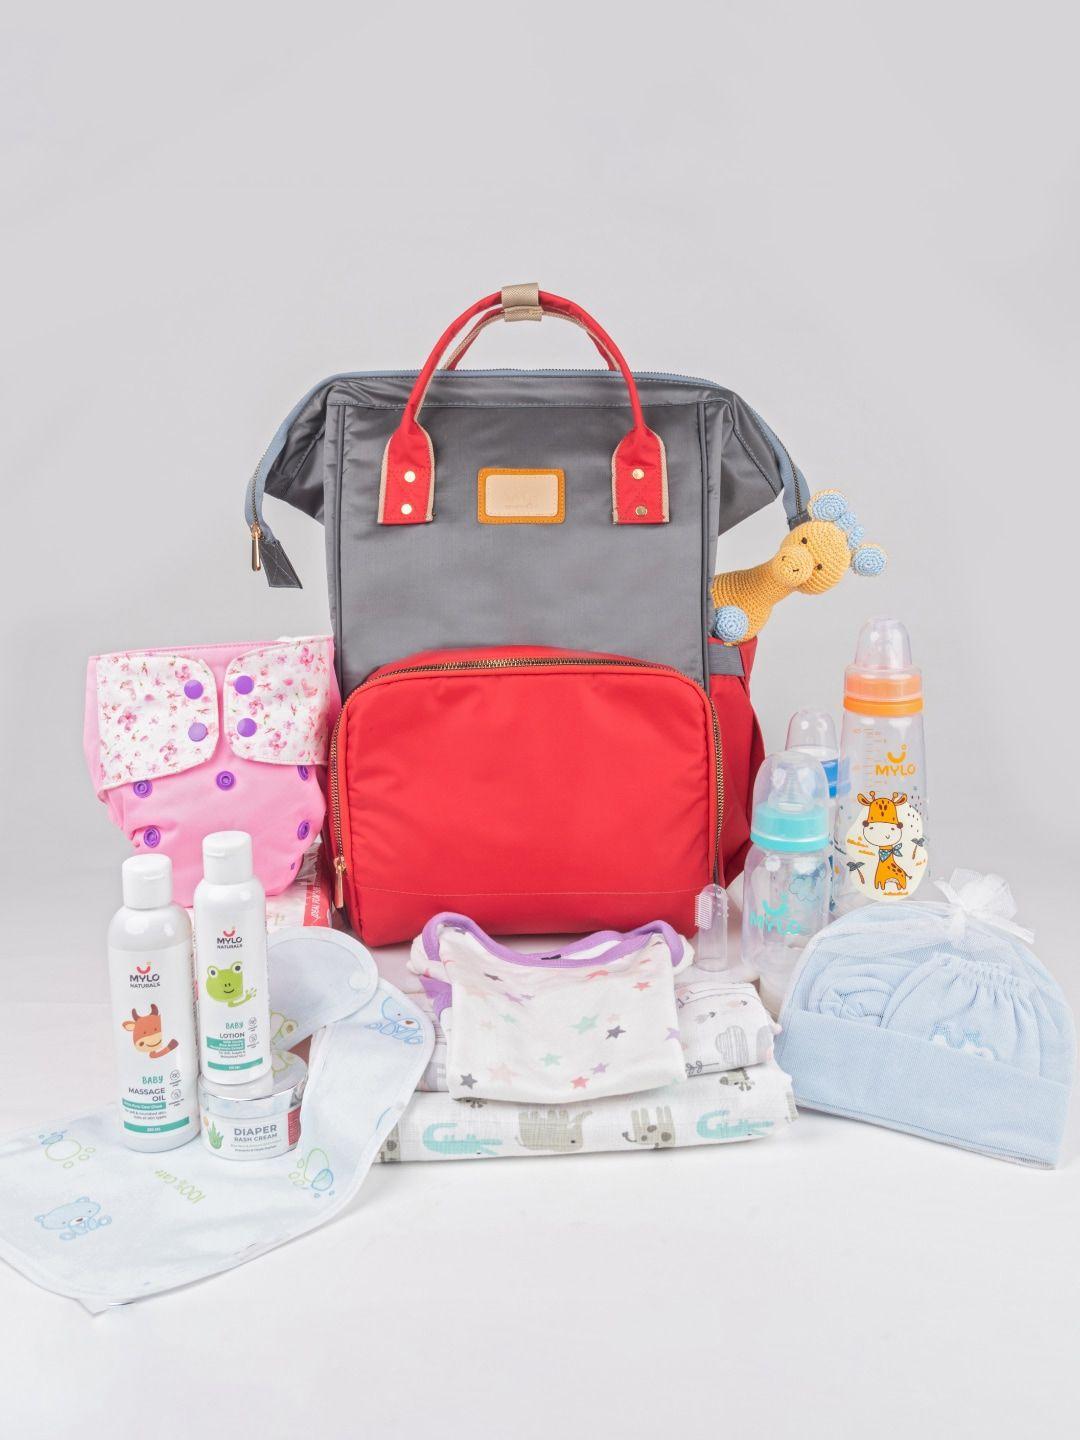 mylo-essentials-kids-grey-&-red-water-resistant-diaper-backpack-with-free-diaper-pouch